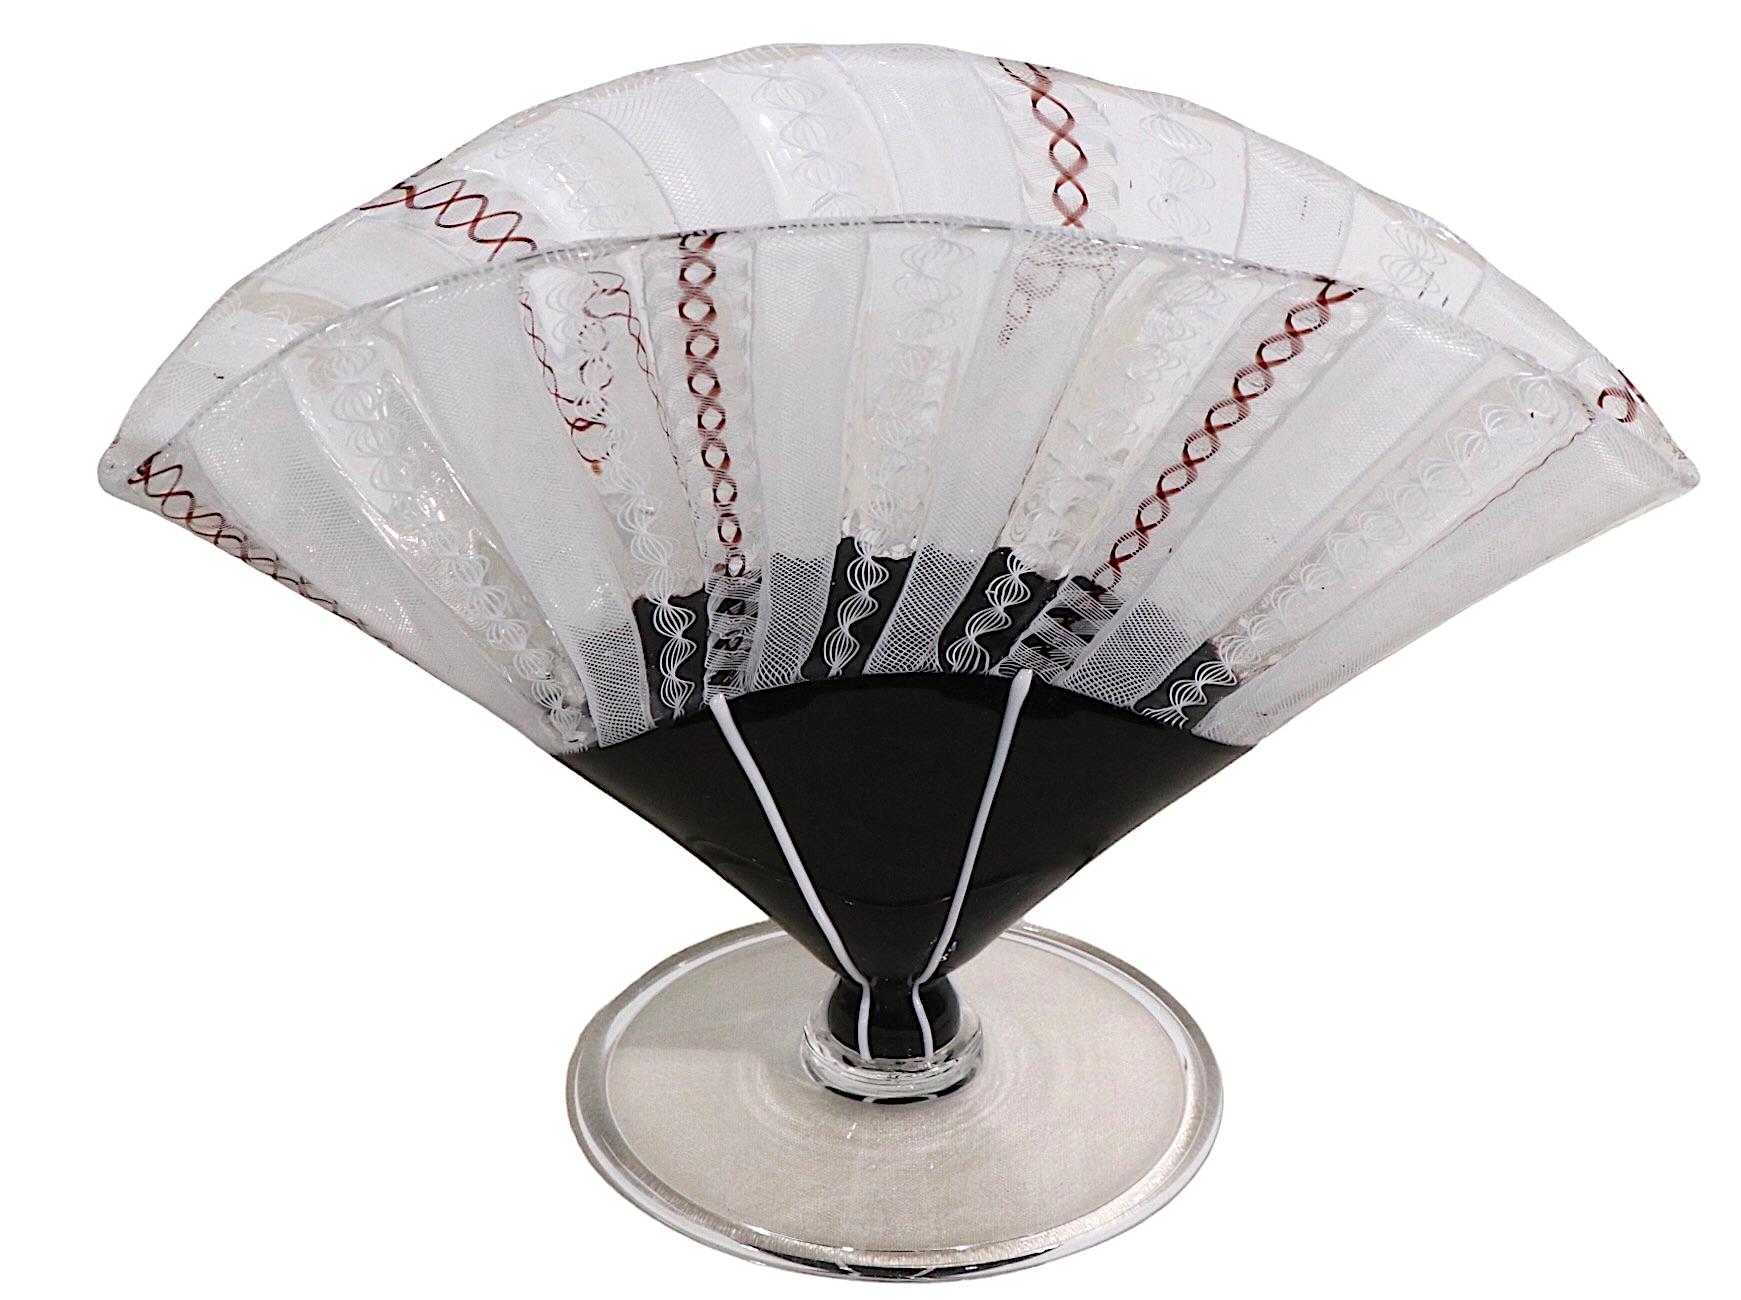 Iconic Italian Art Glass Fan vase, by Flavio Bianconi for Venini, circa 1940's. This example is in excellent, original condition, free of damage or repairs, it is fully and correctly acid stamp marked ( Venini Murano Italia ) on verso. A classic